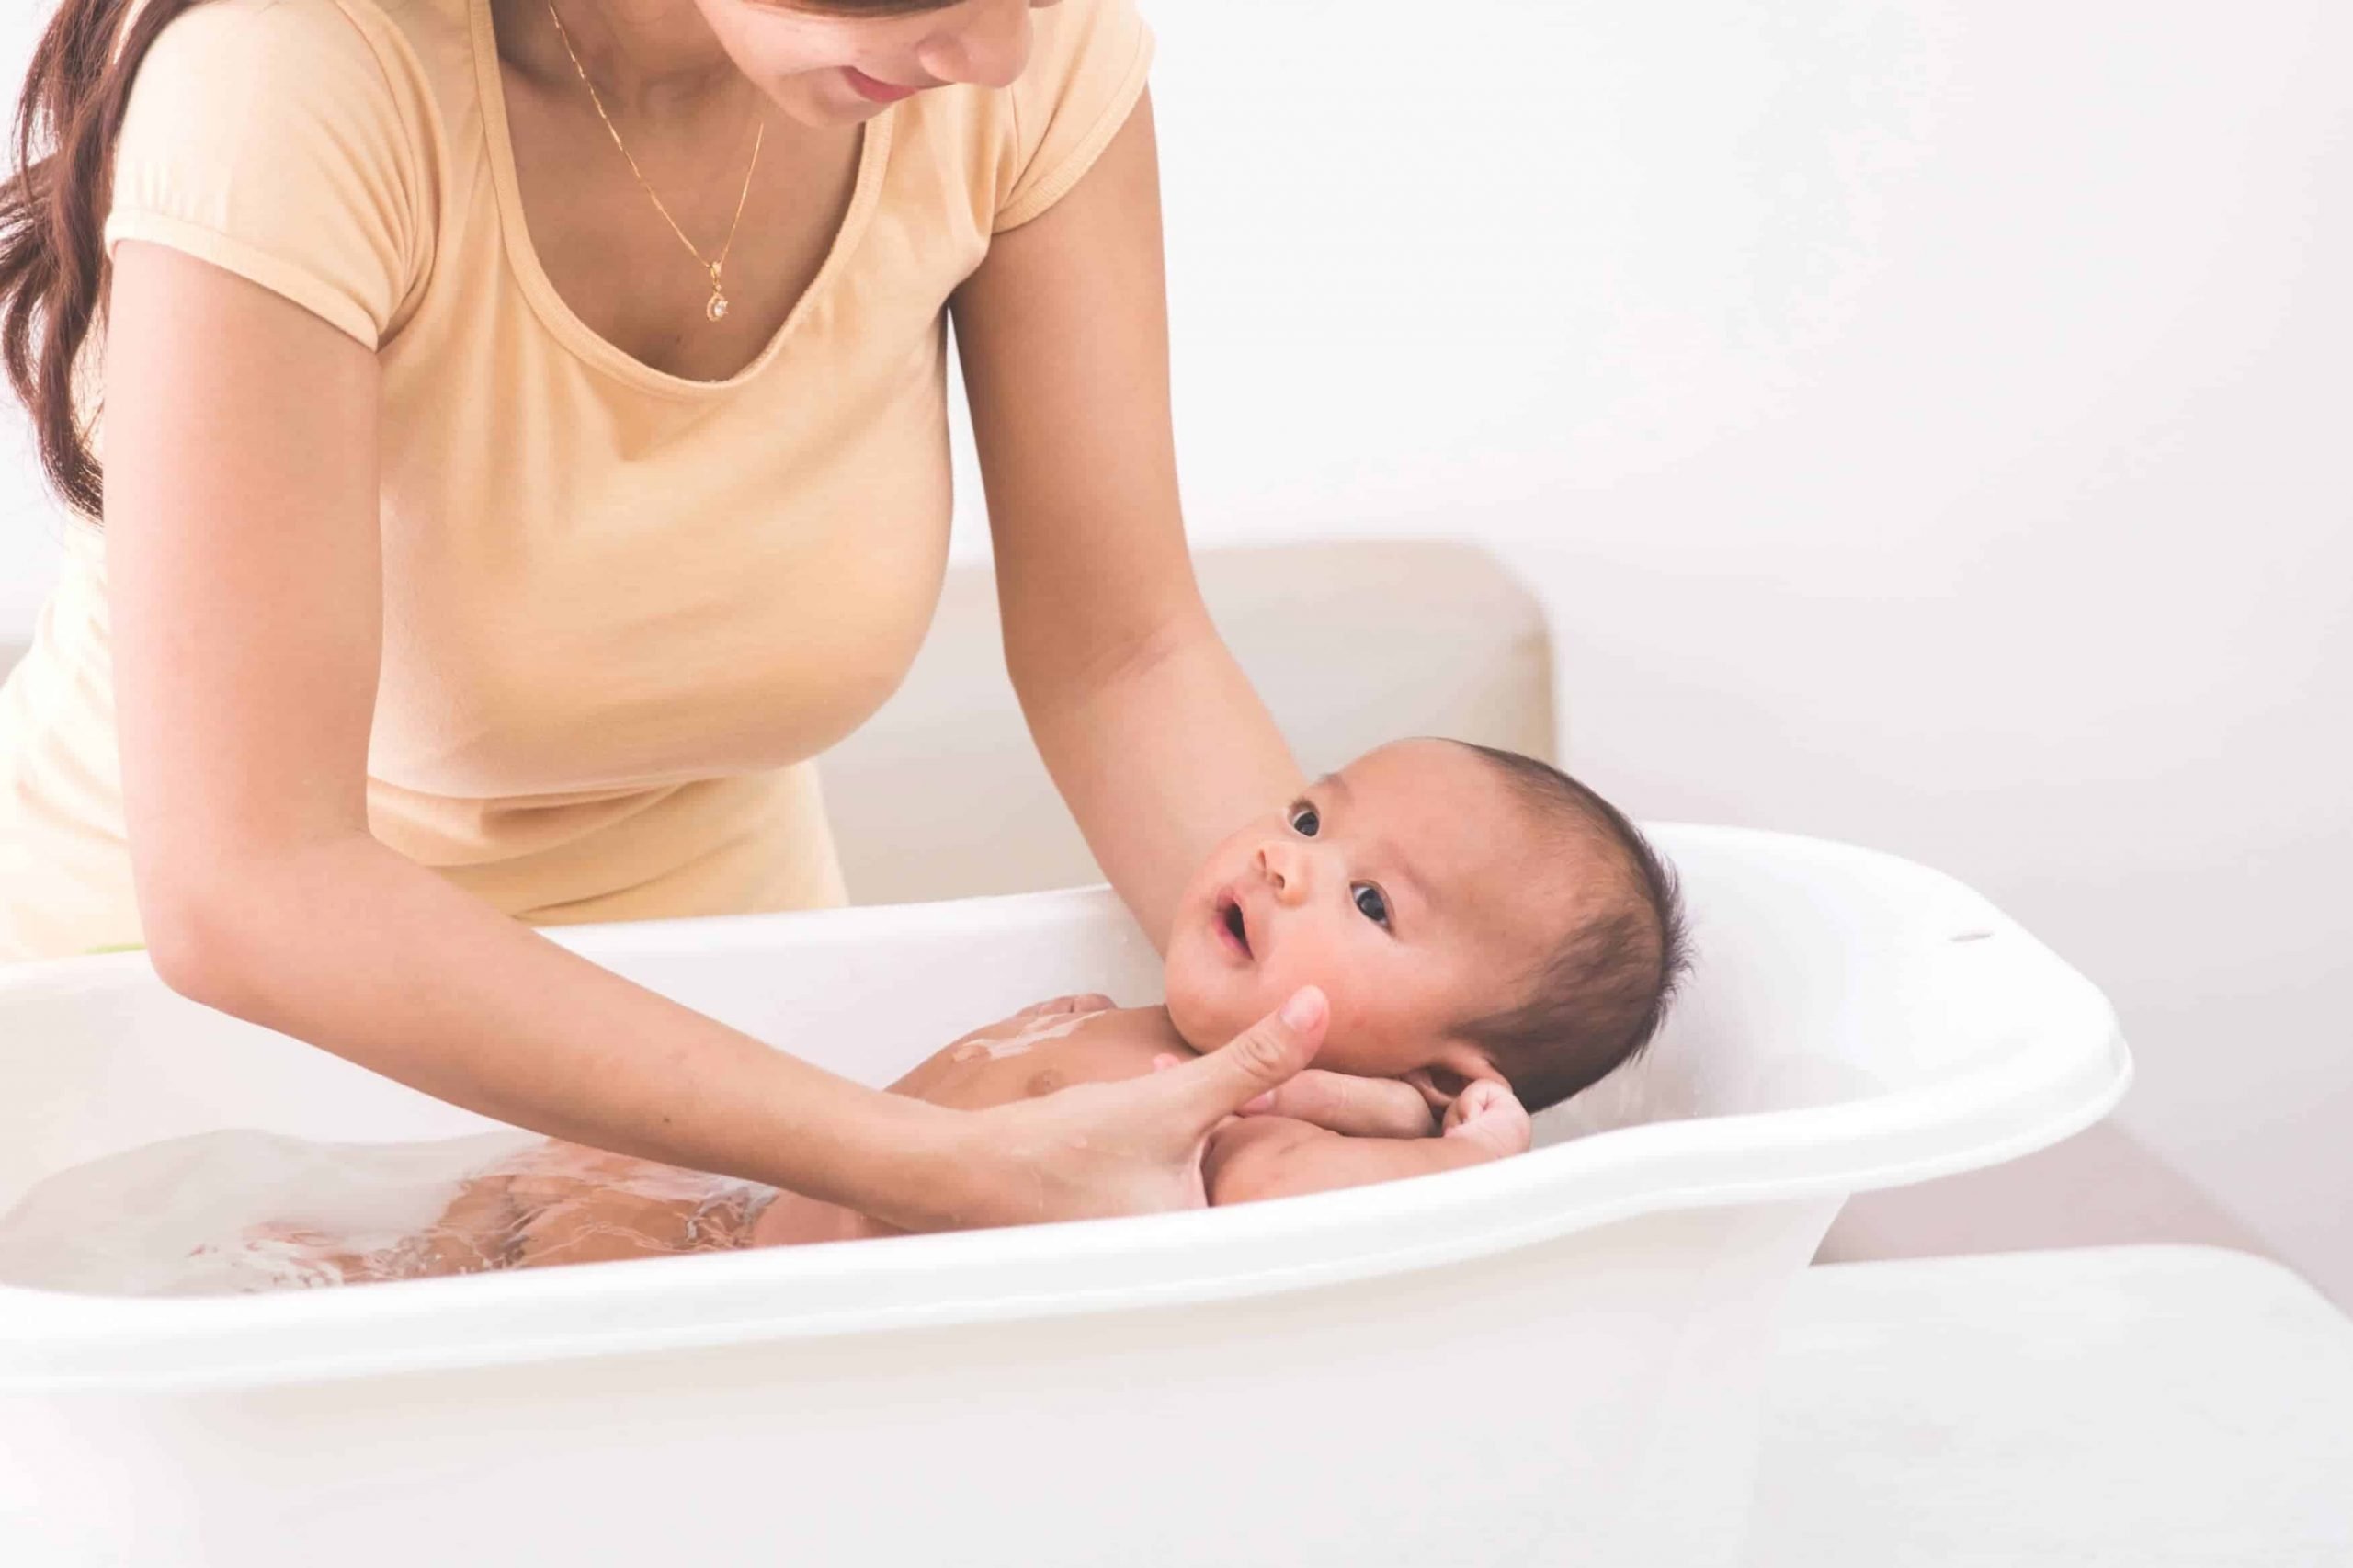 Detox Baths for Babies: How to Give Your Child a Detox Bath